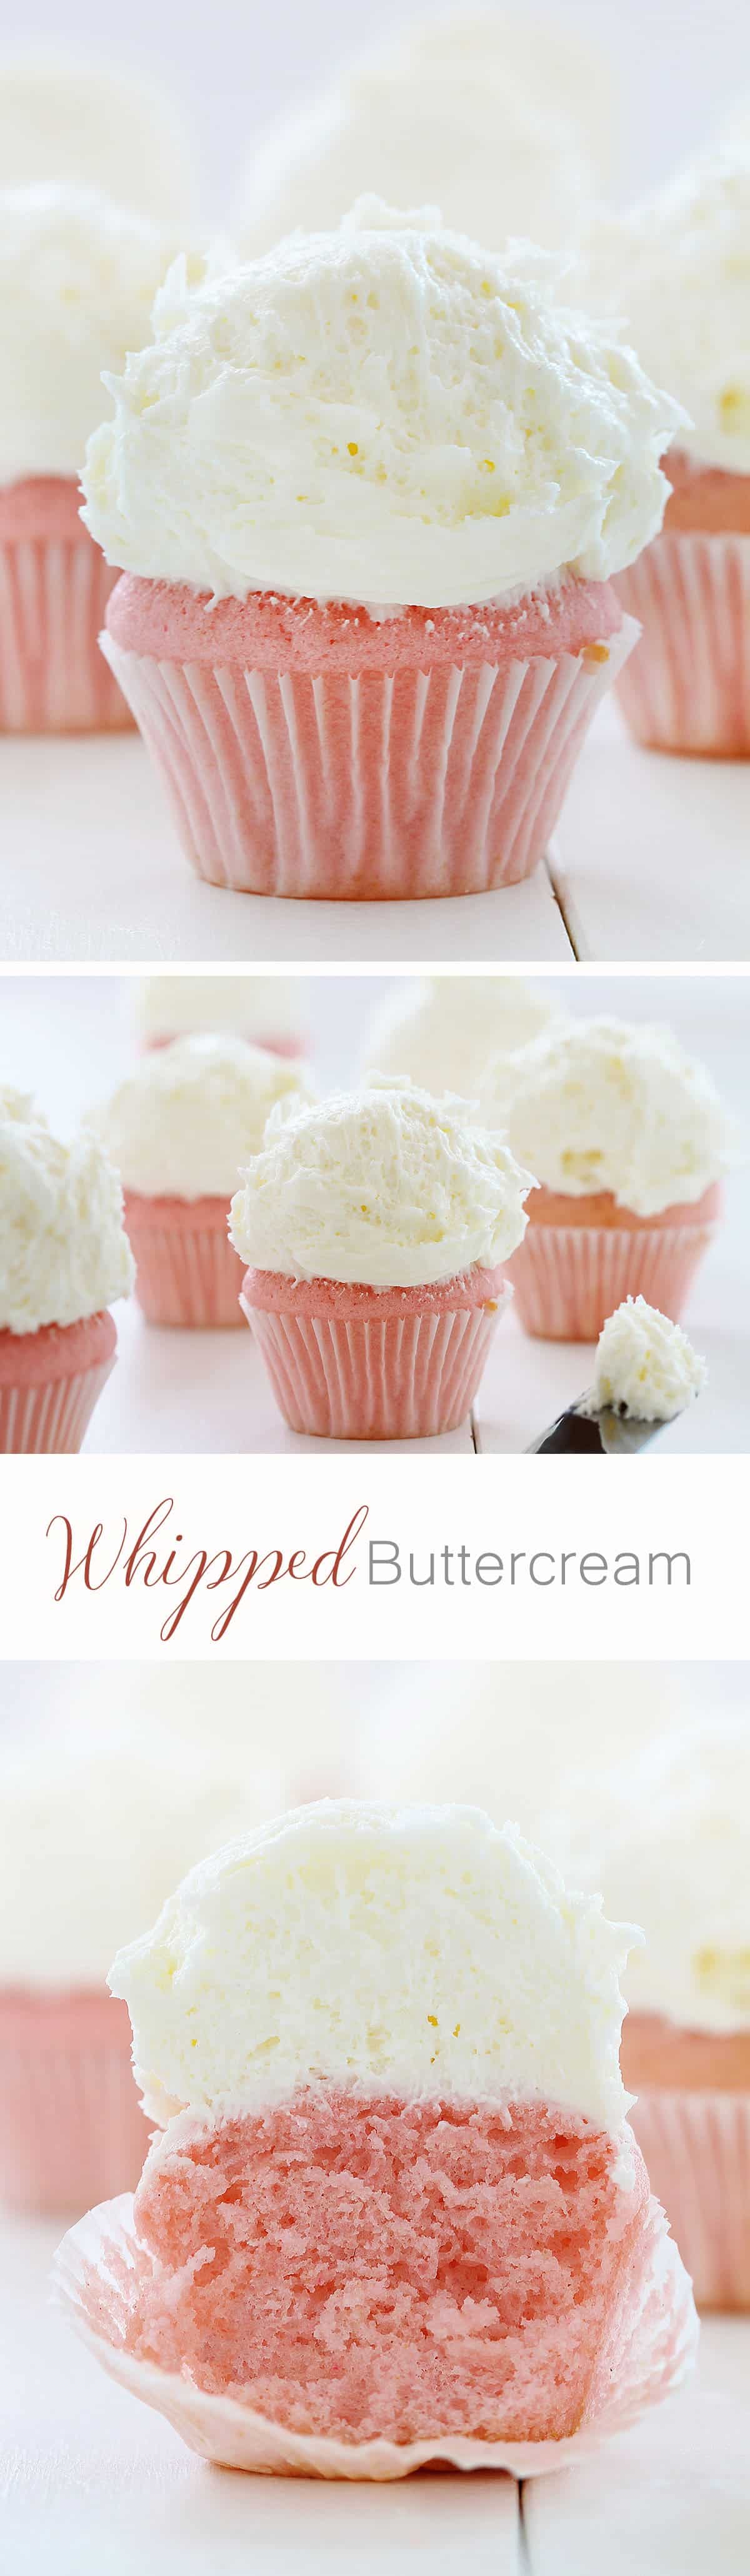 Piled-High Buttercream on Glorious Pink Velvet Cuppies!